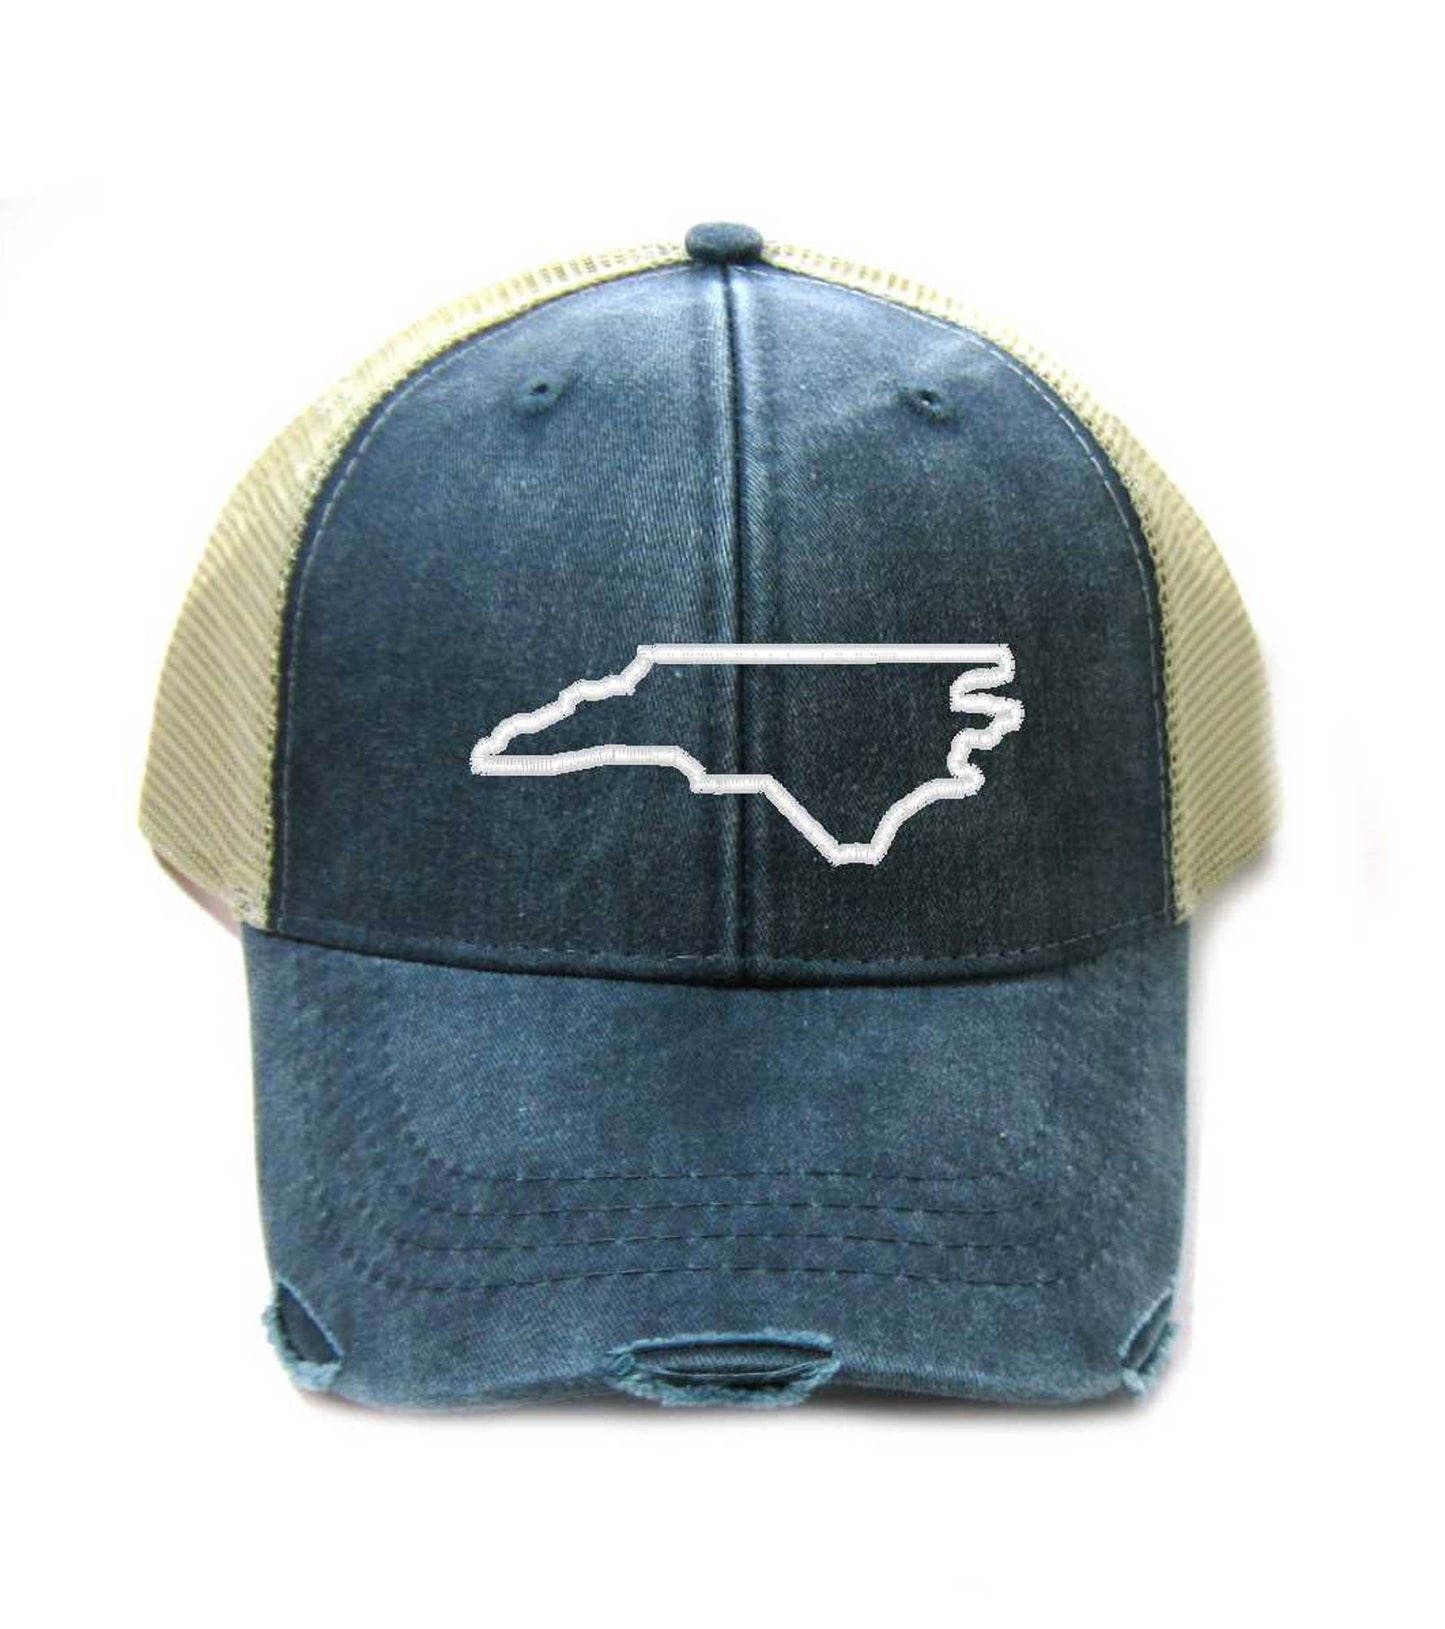 North Carolina Hat - Distressed Snapback Trucker Hat - North Carolina State Outline - Many Colors Available